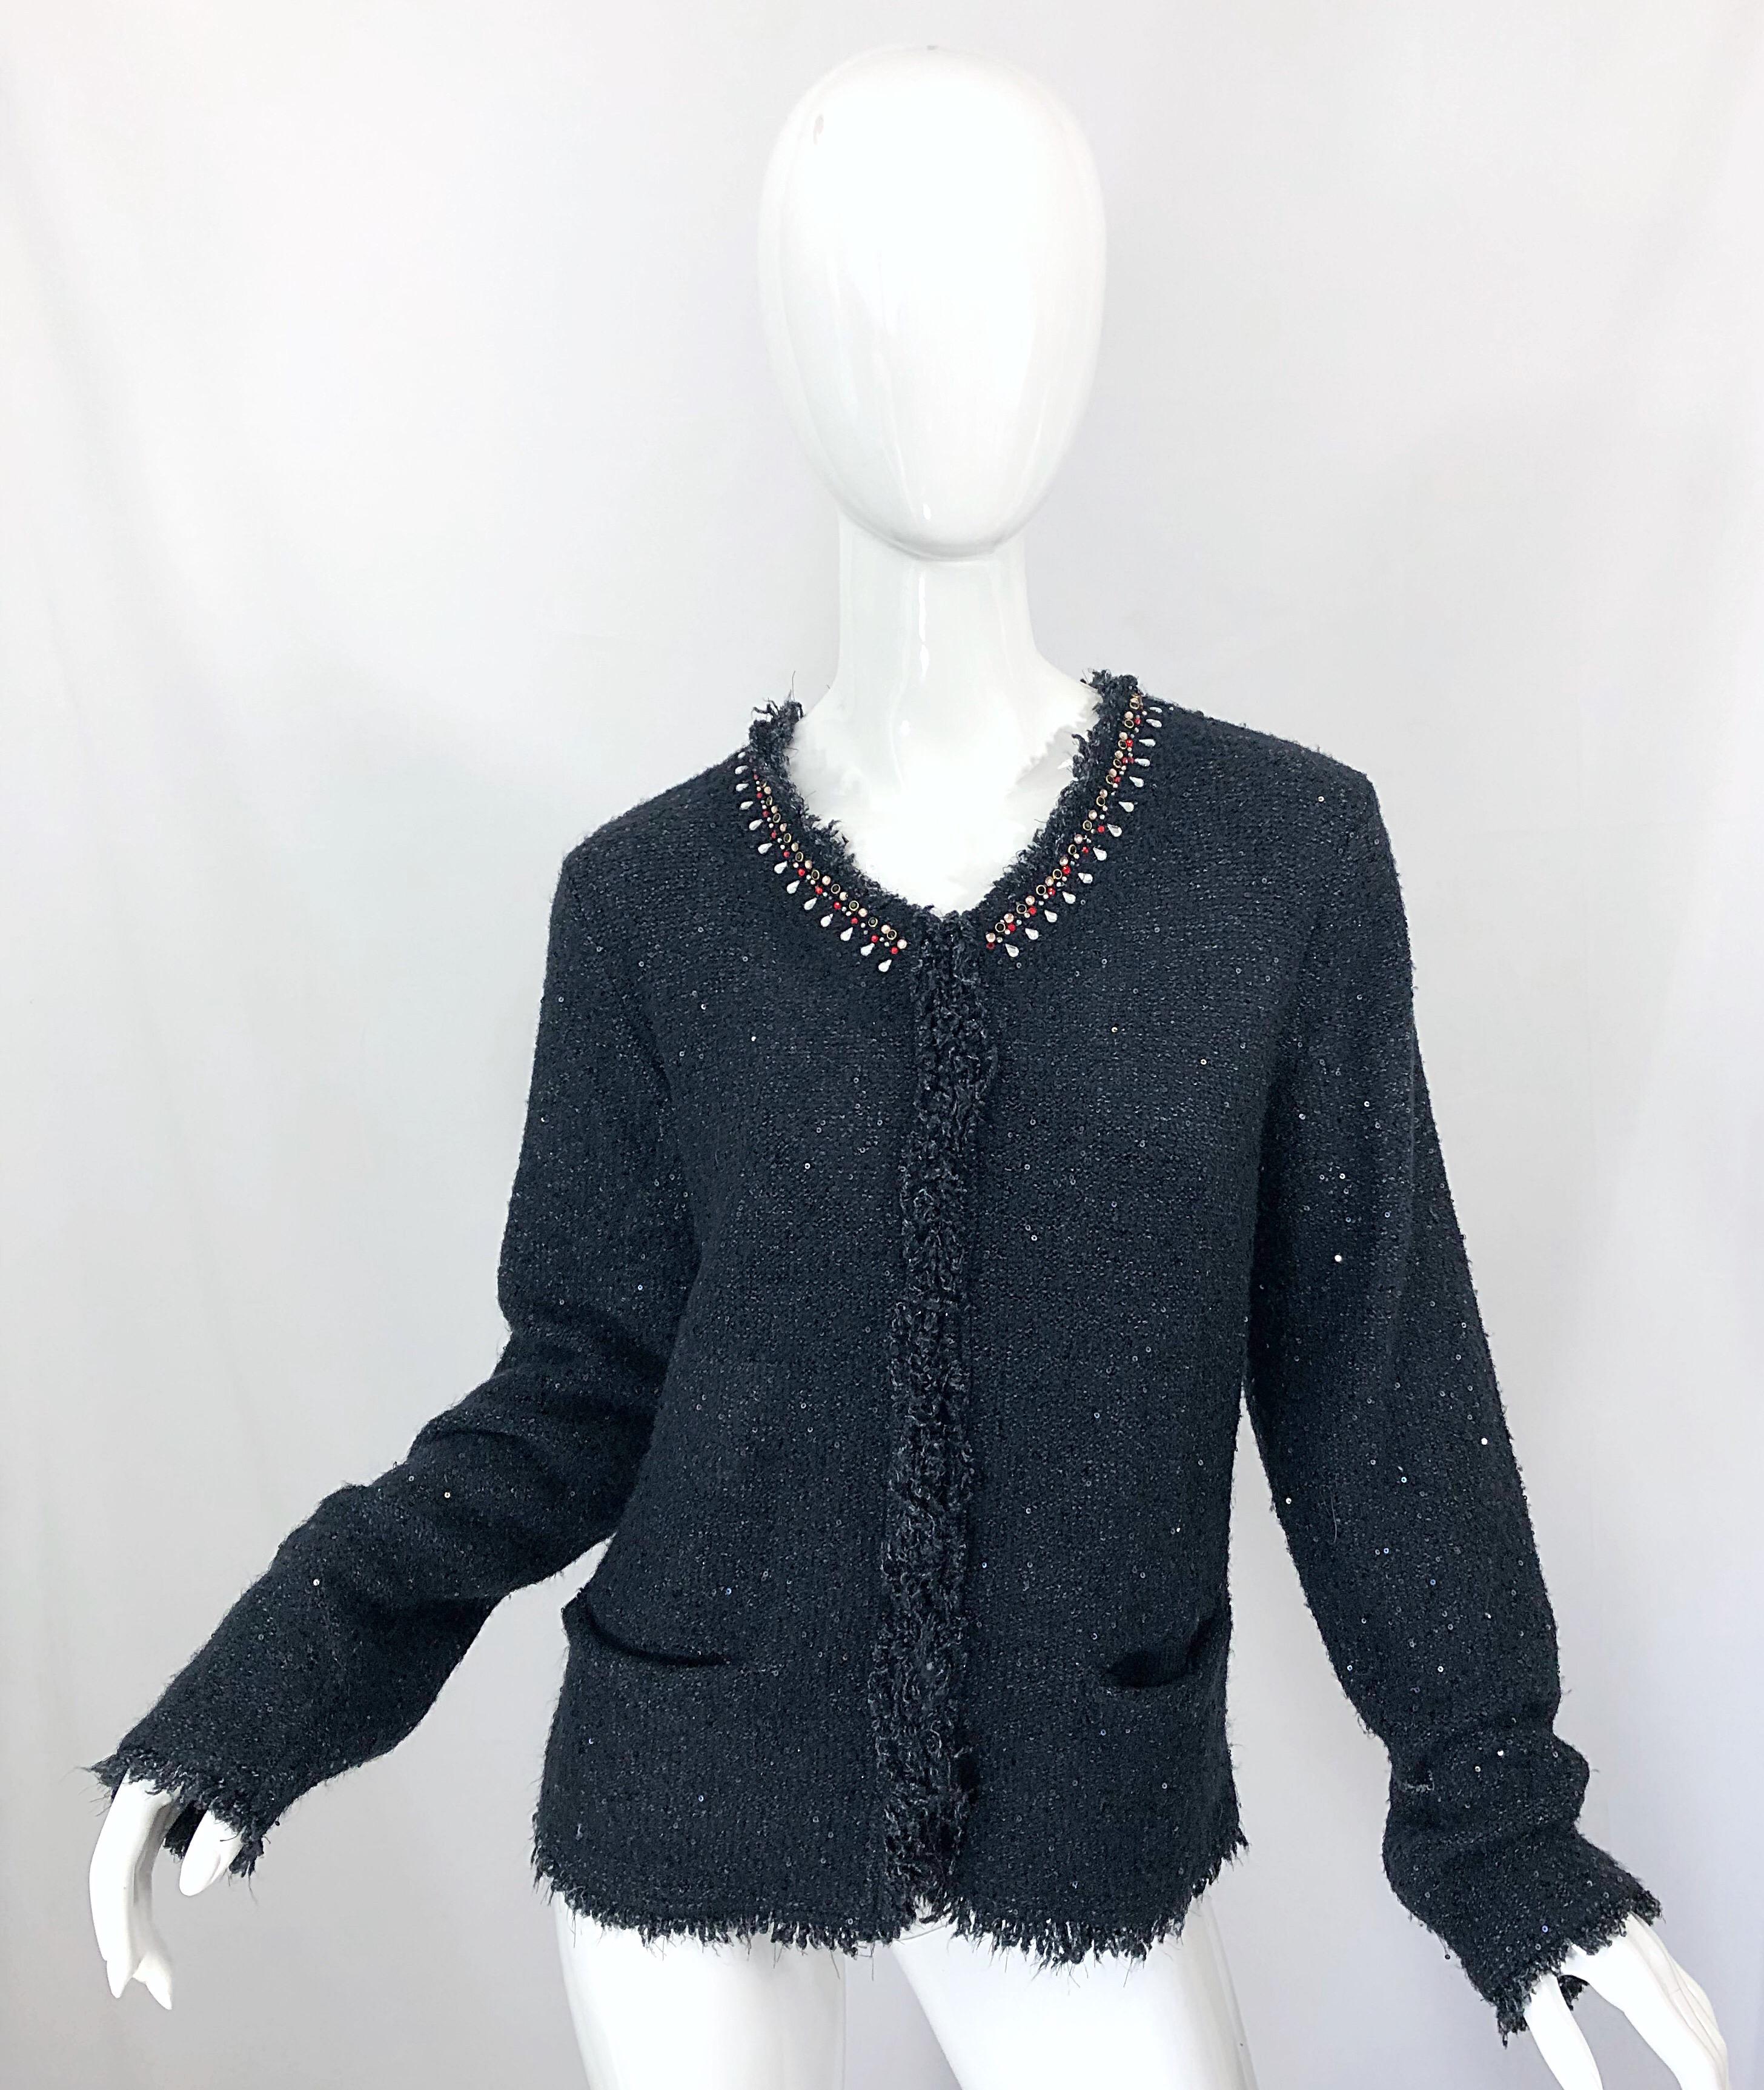 Beautiful 90s DONNA KARAN sequined, beaded and rhinestone long sleeve black cardigan. Soft blend of acrylic, nylon and spandex feels amazing against the skin. POCKET at each side of the waist. 
Hidden hook-and-eye closures up the front. Hundreds of